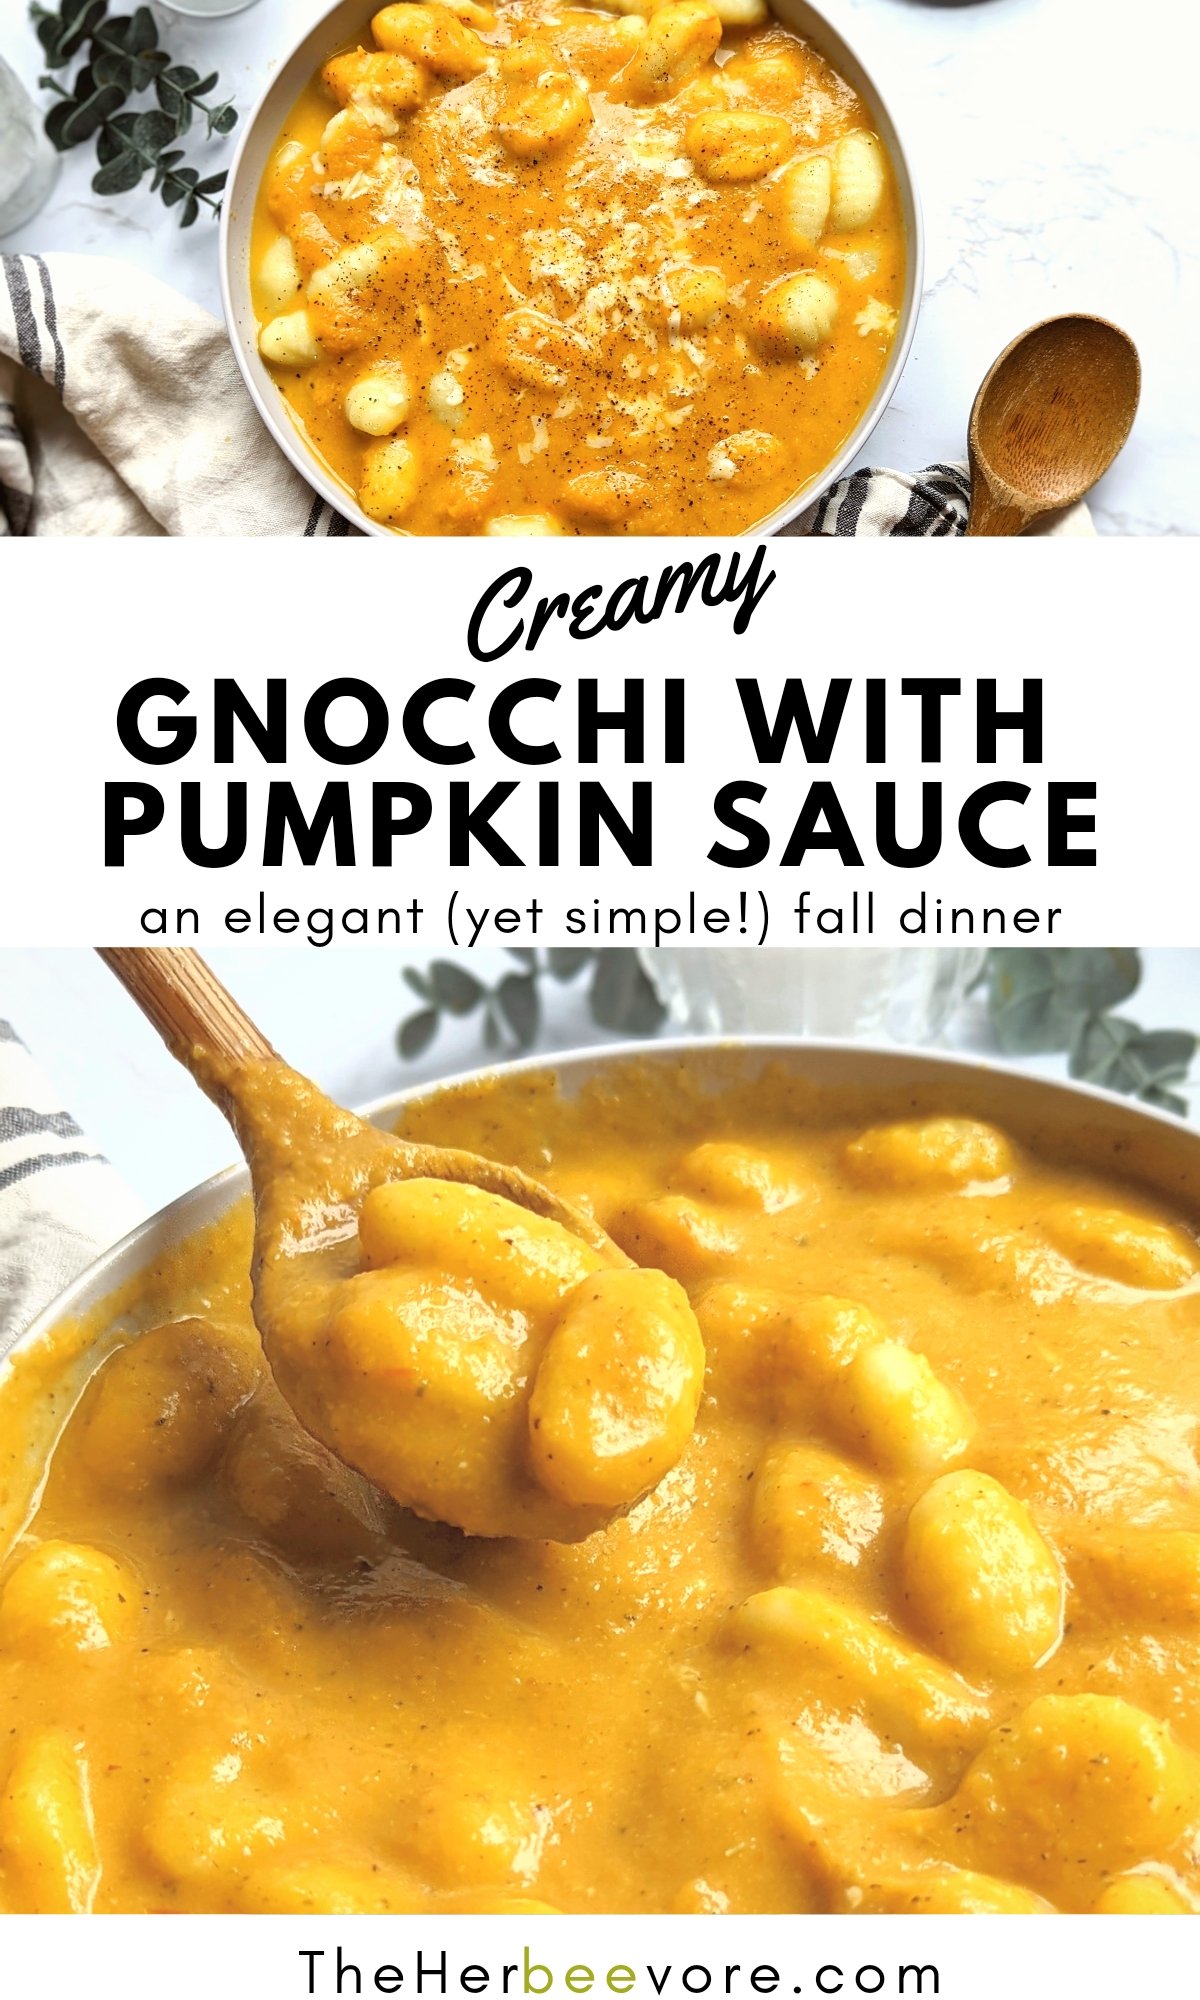 gnocchi with pumpkin sauce recipe vegetarian fall recipes for dinner party halloween dinners ideas